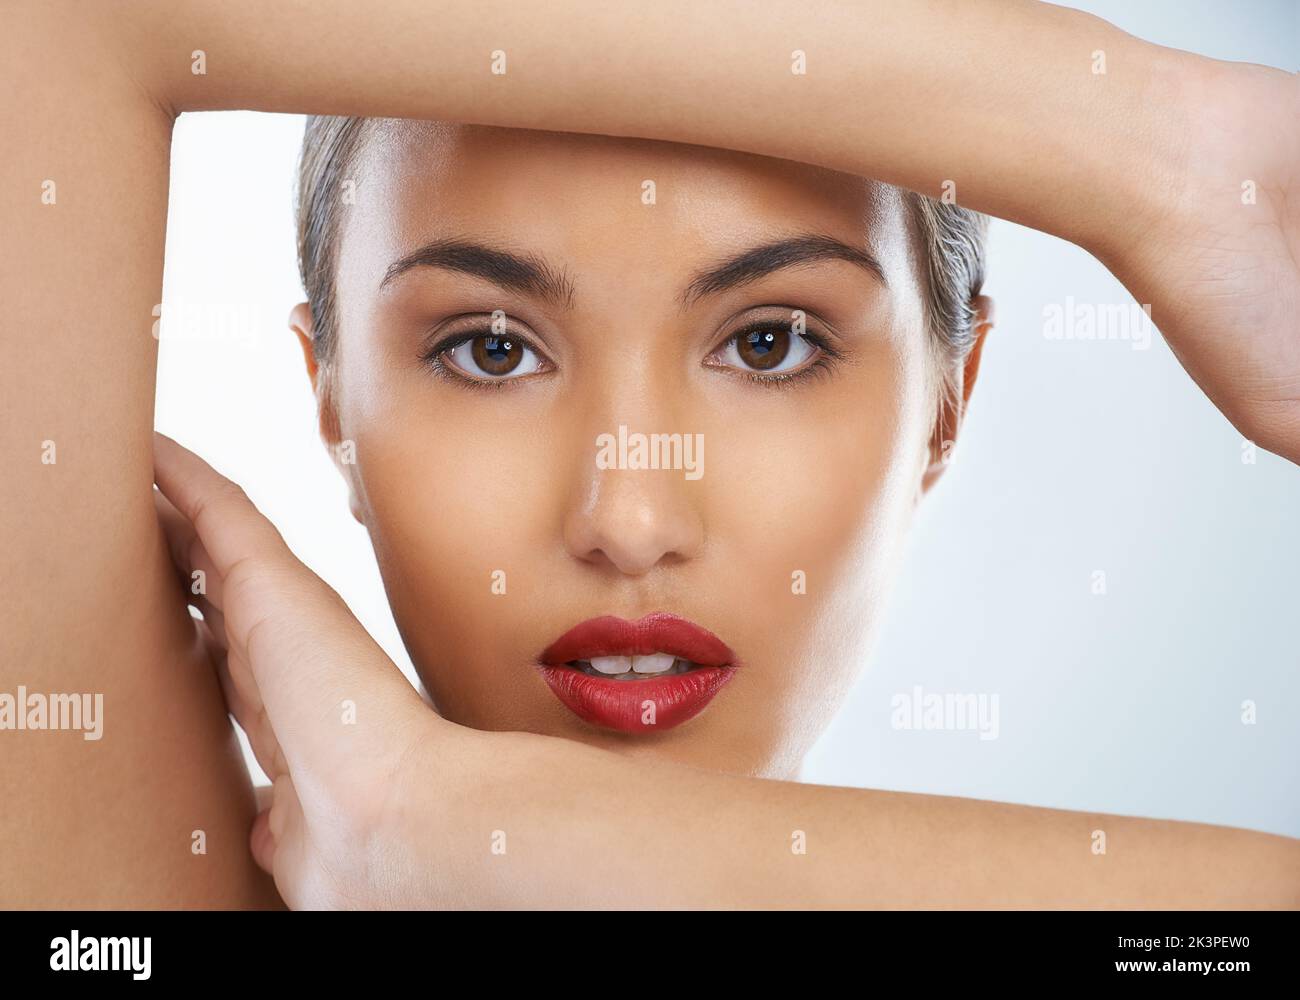 Framing her natural beauty. Closeup beauty shot of an attractive young woman framing her head with her arms. Stock Photo